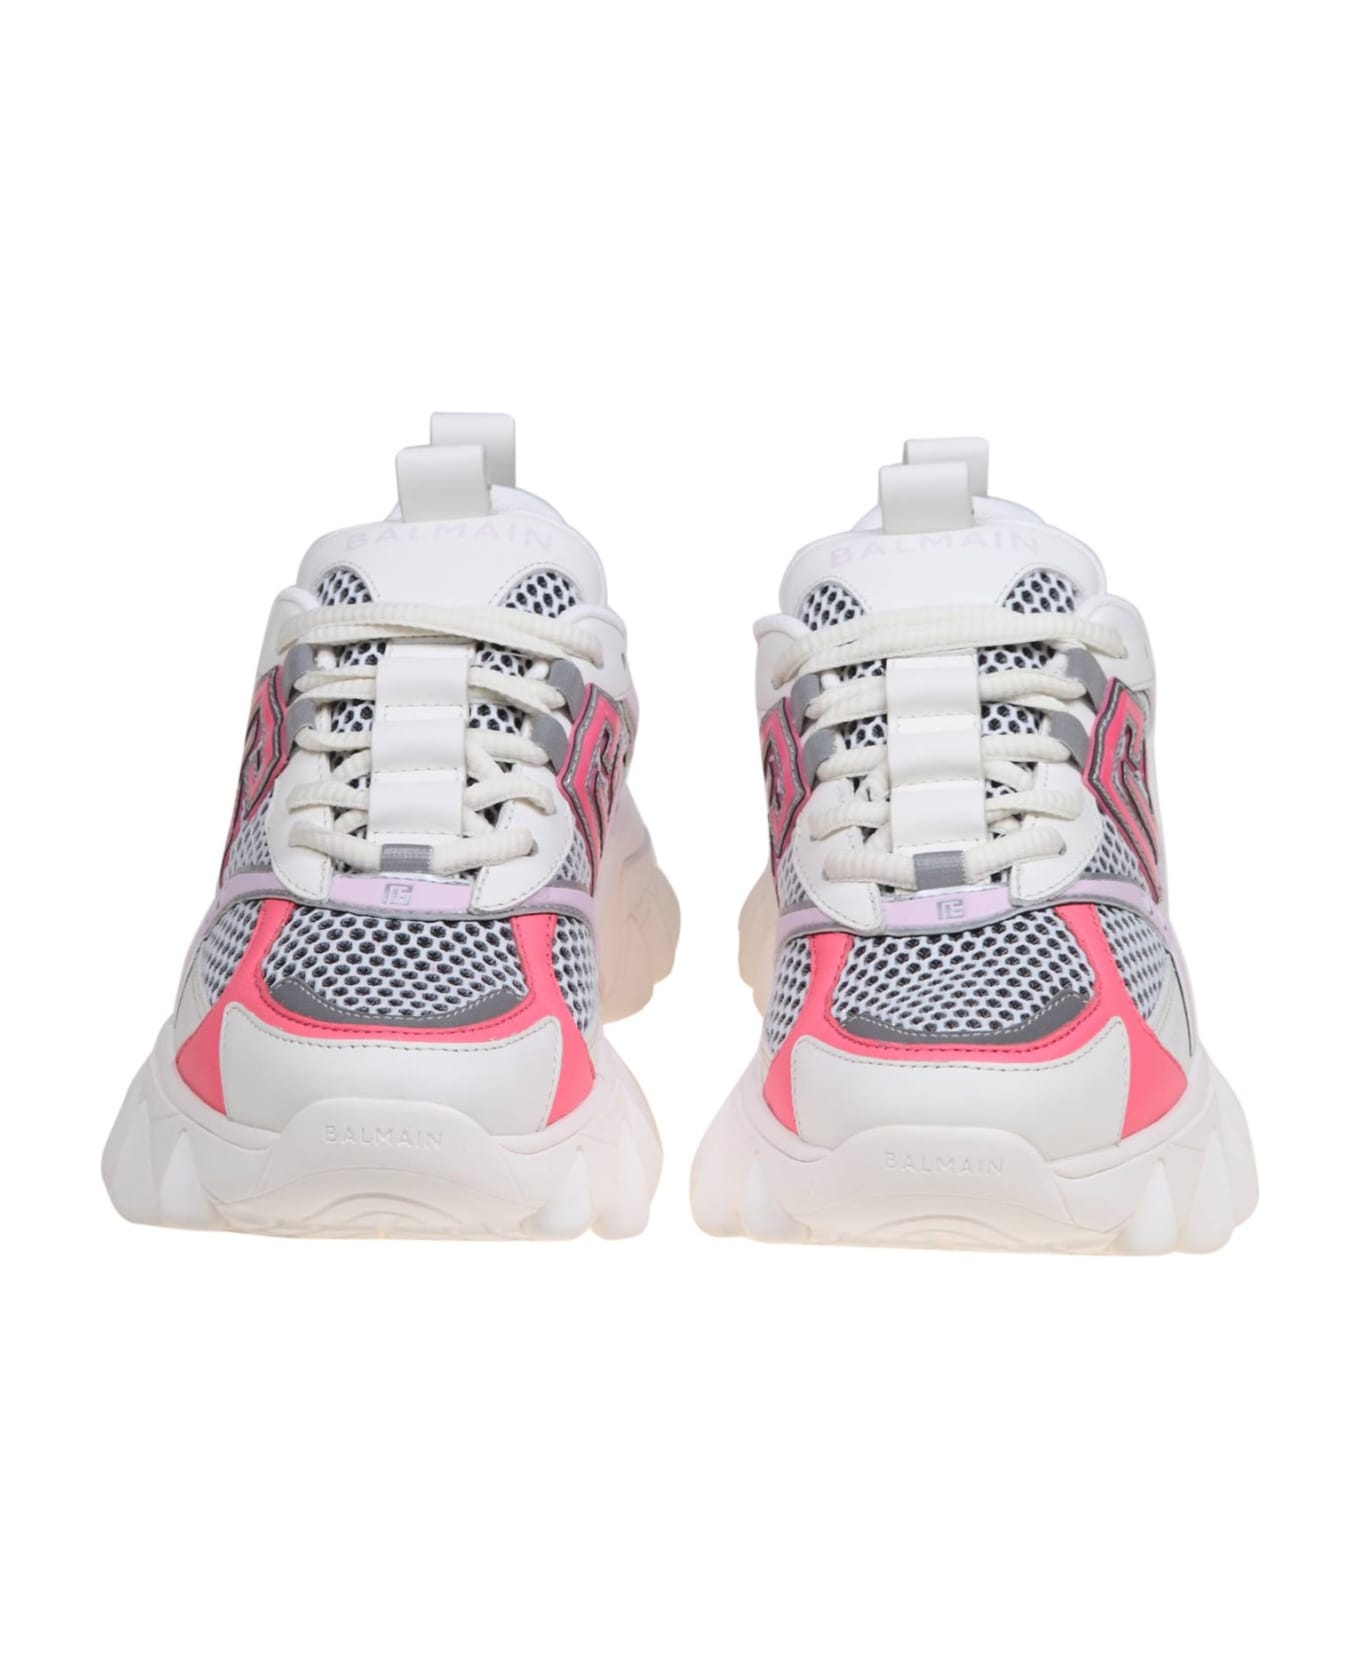 Balmain B-east Sneakers In Mix Of White And Pink Materials - Blanc Rose